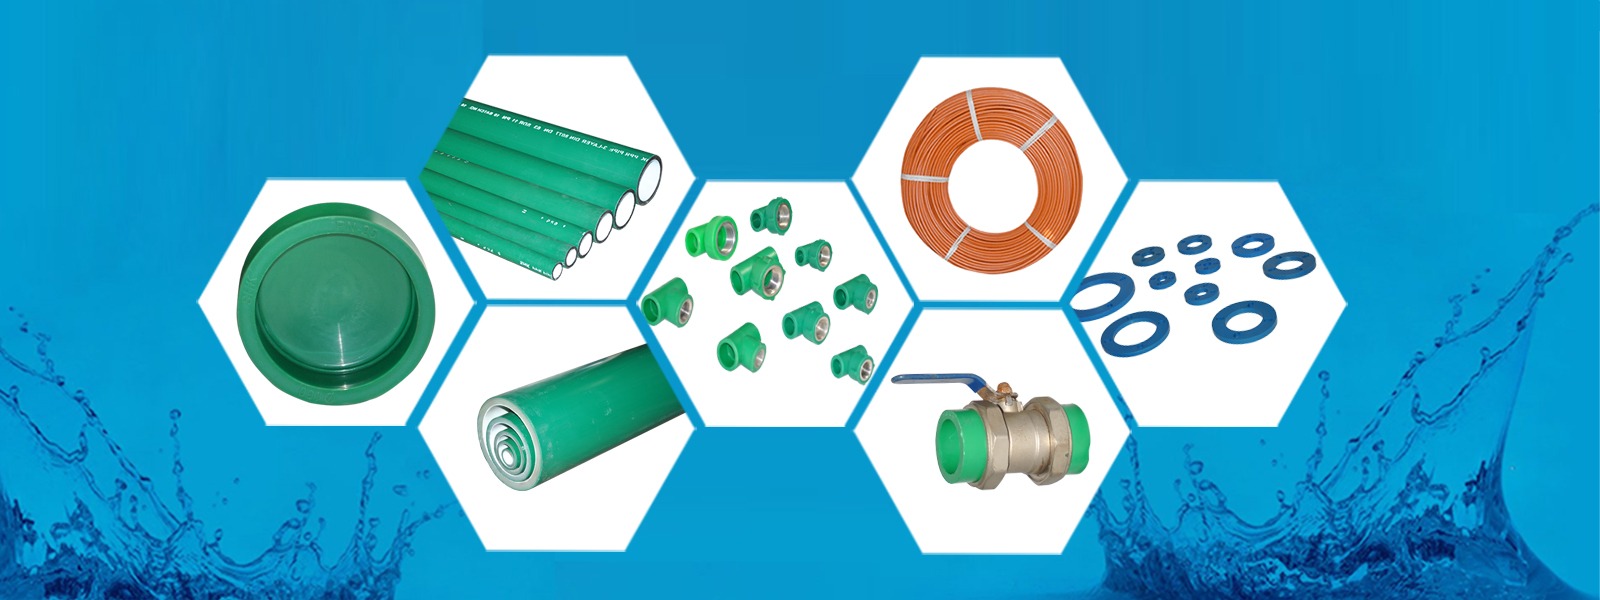 ppr pipes manufacturer